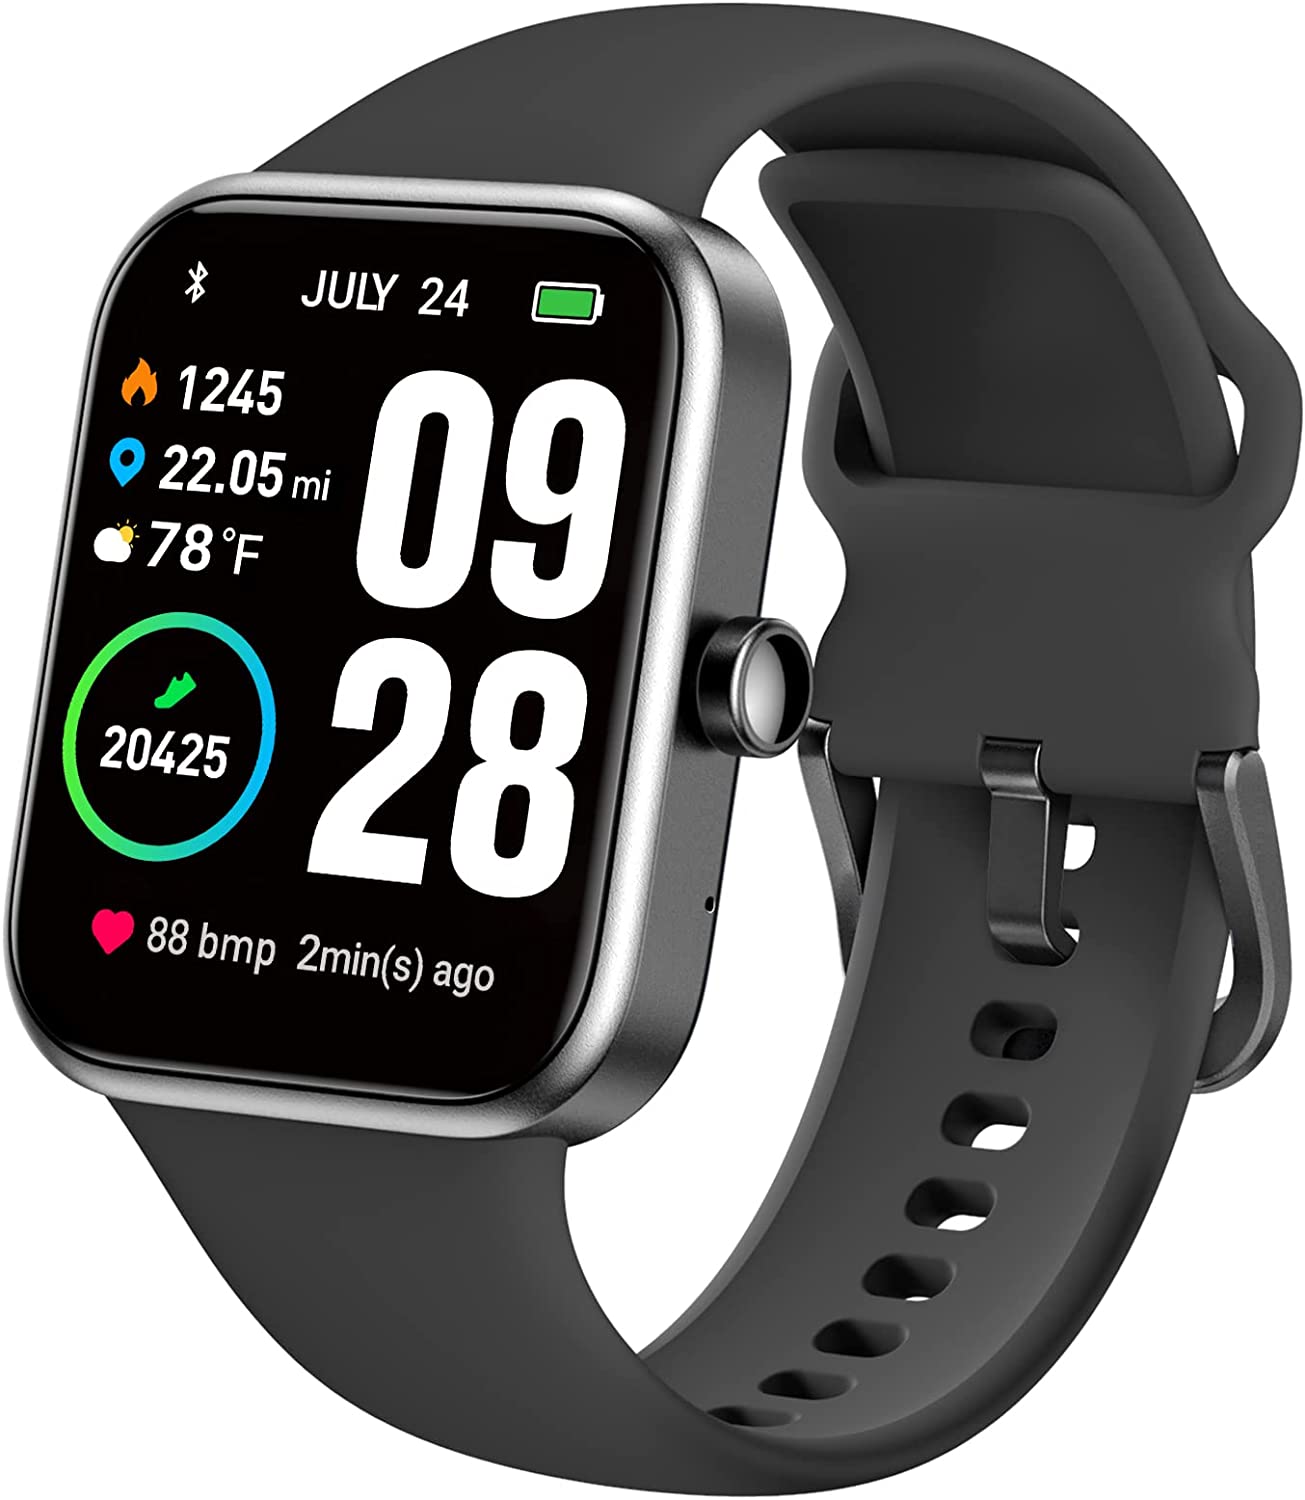 TOZO S2 44mm Smart Watch – Just $39.99 at Amazon